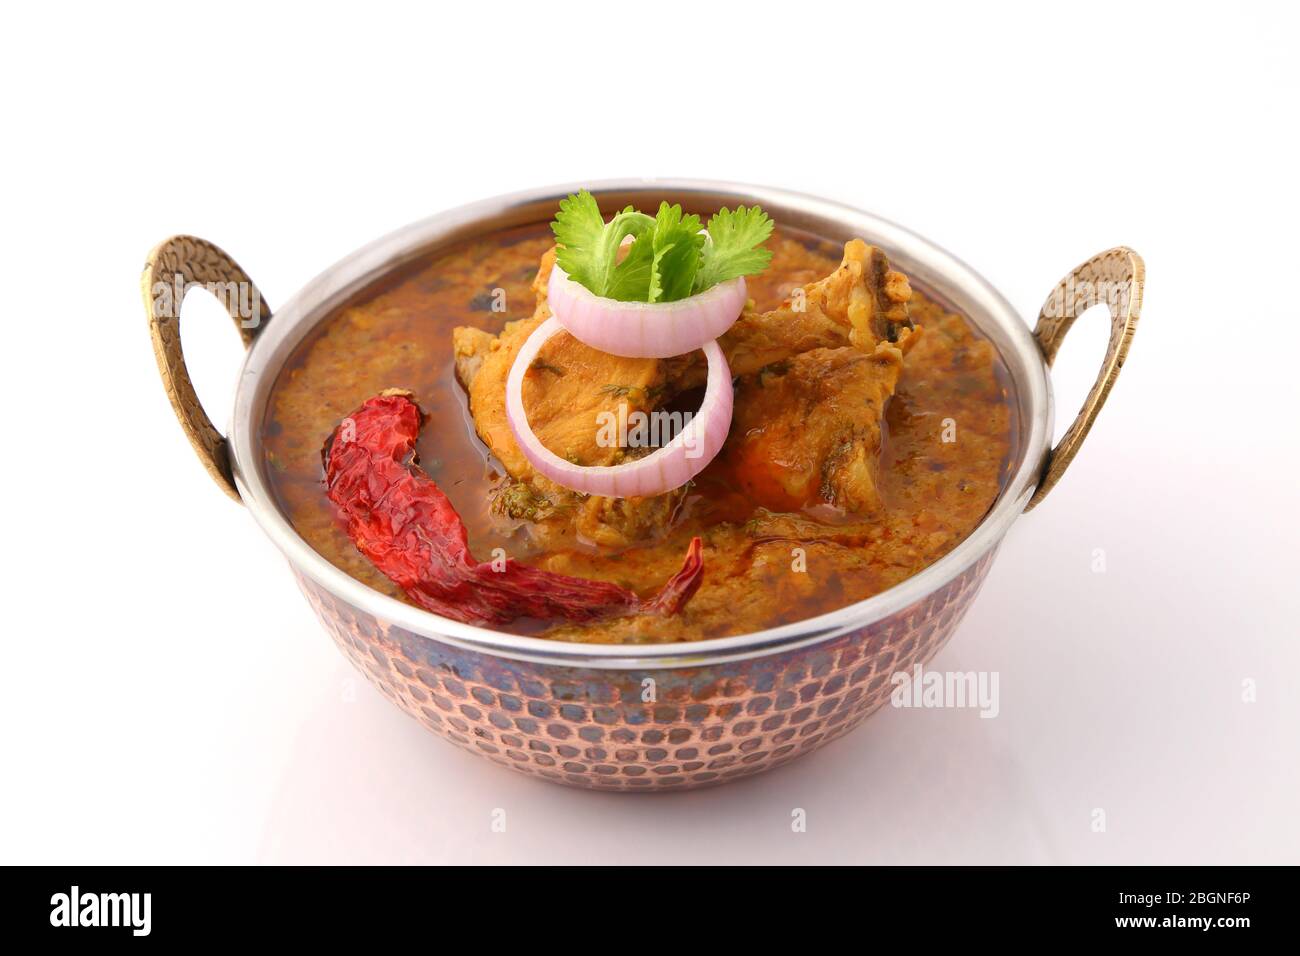 Curry-Huhn oder Curry-Hammel Stockfoto